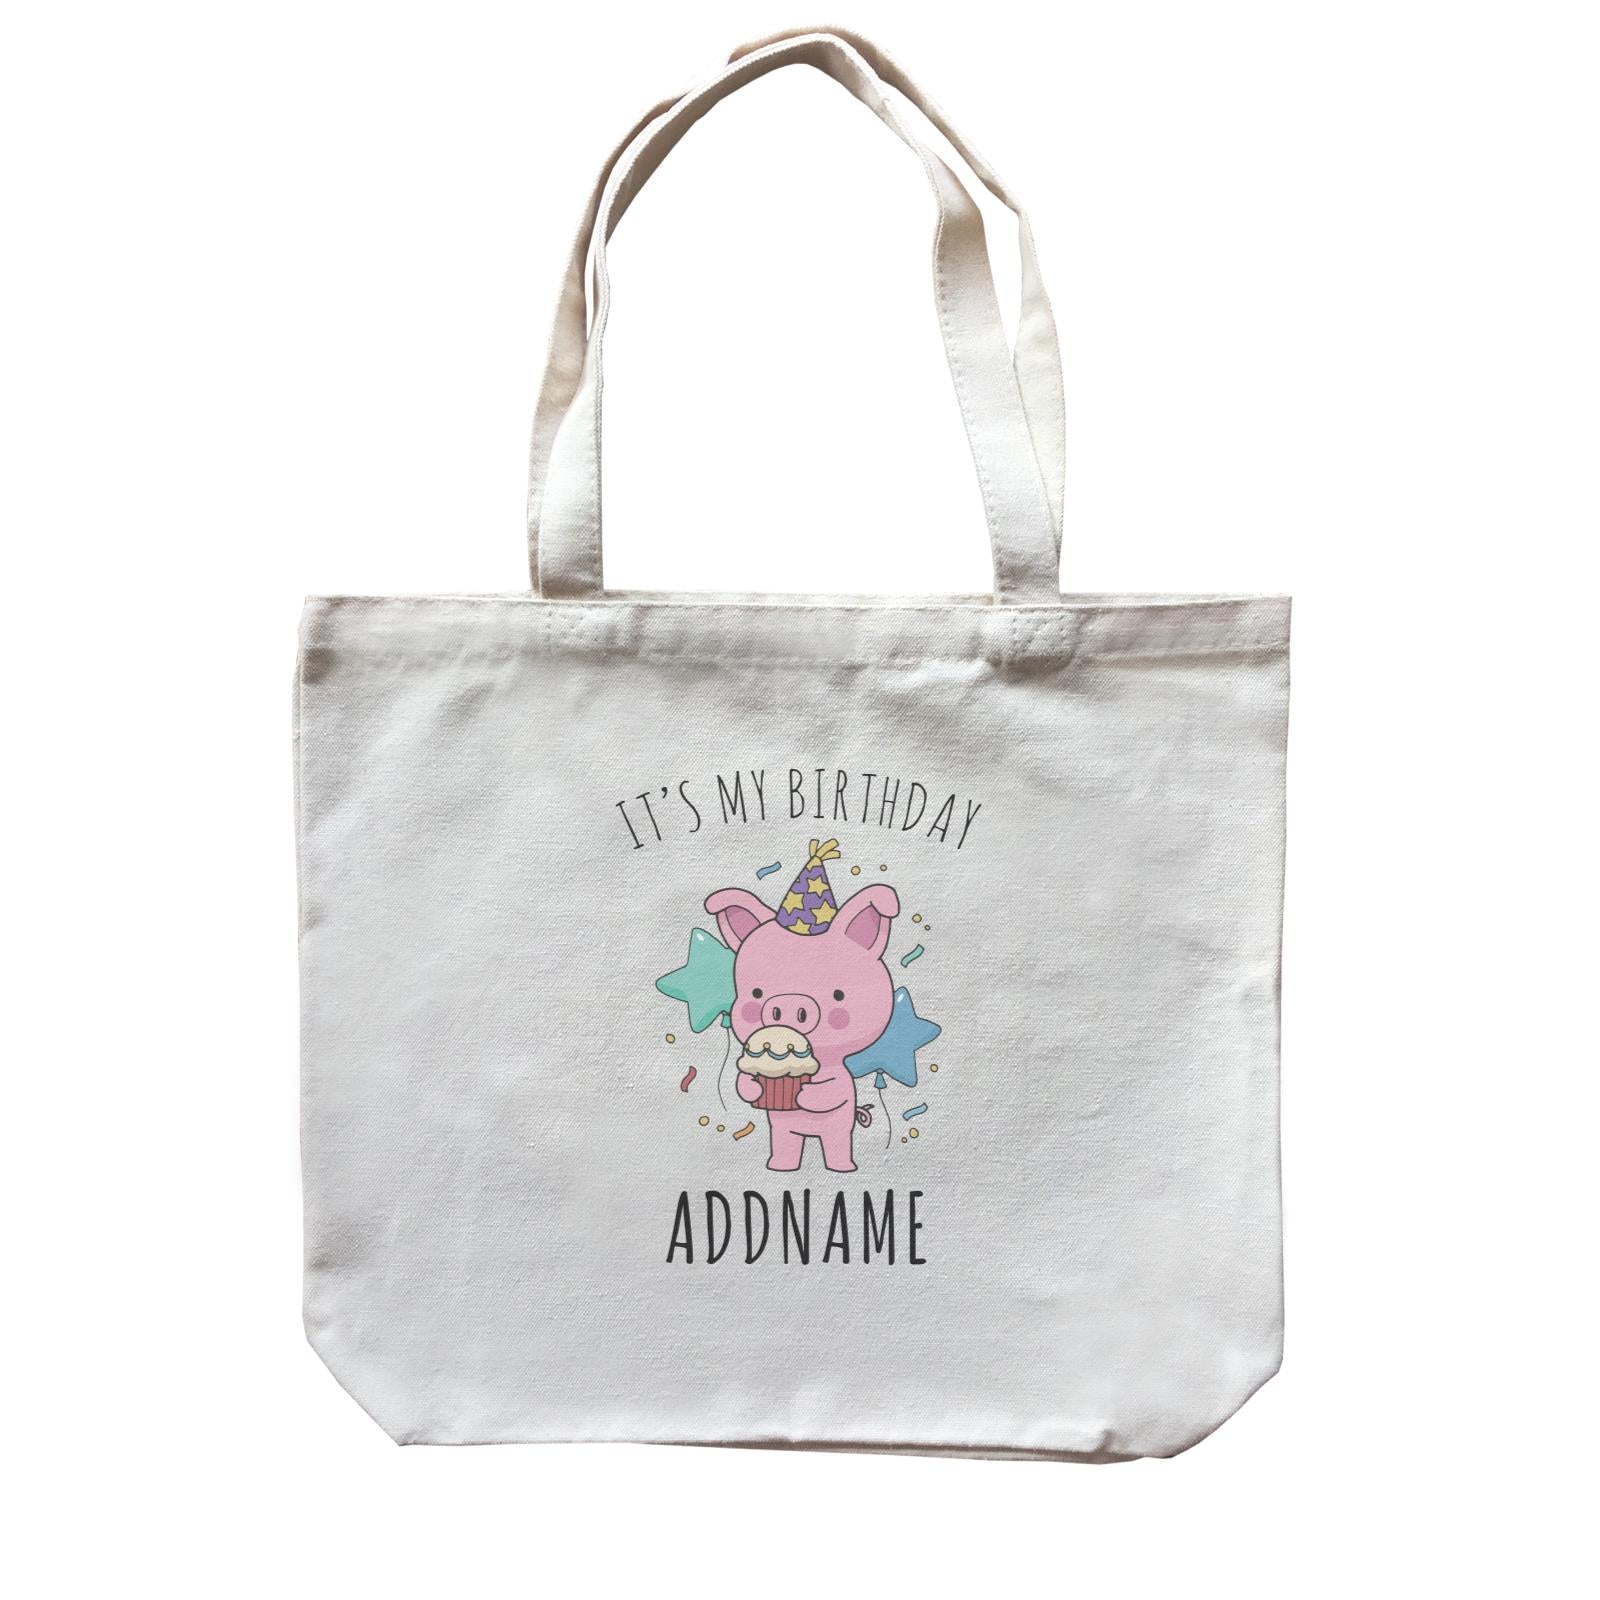 Birthday Sketch Animals Pig with Party Hat Eating Cupcake It's My Birthday Addname Canvas Bag